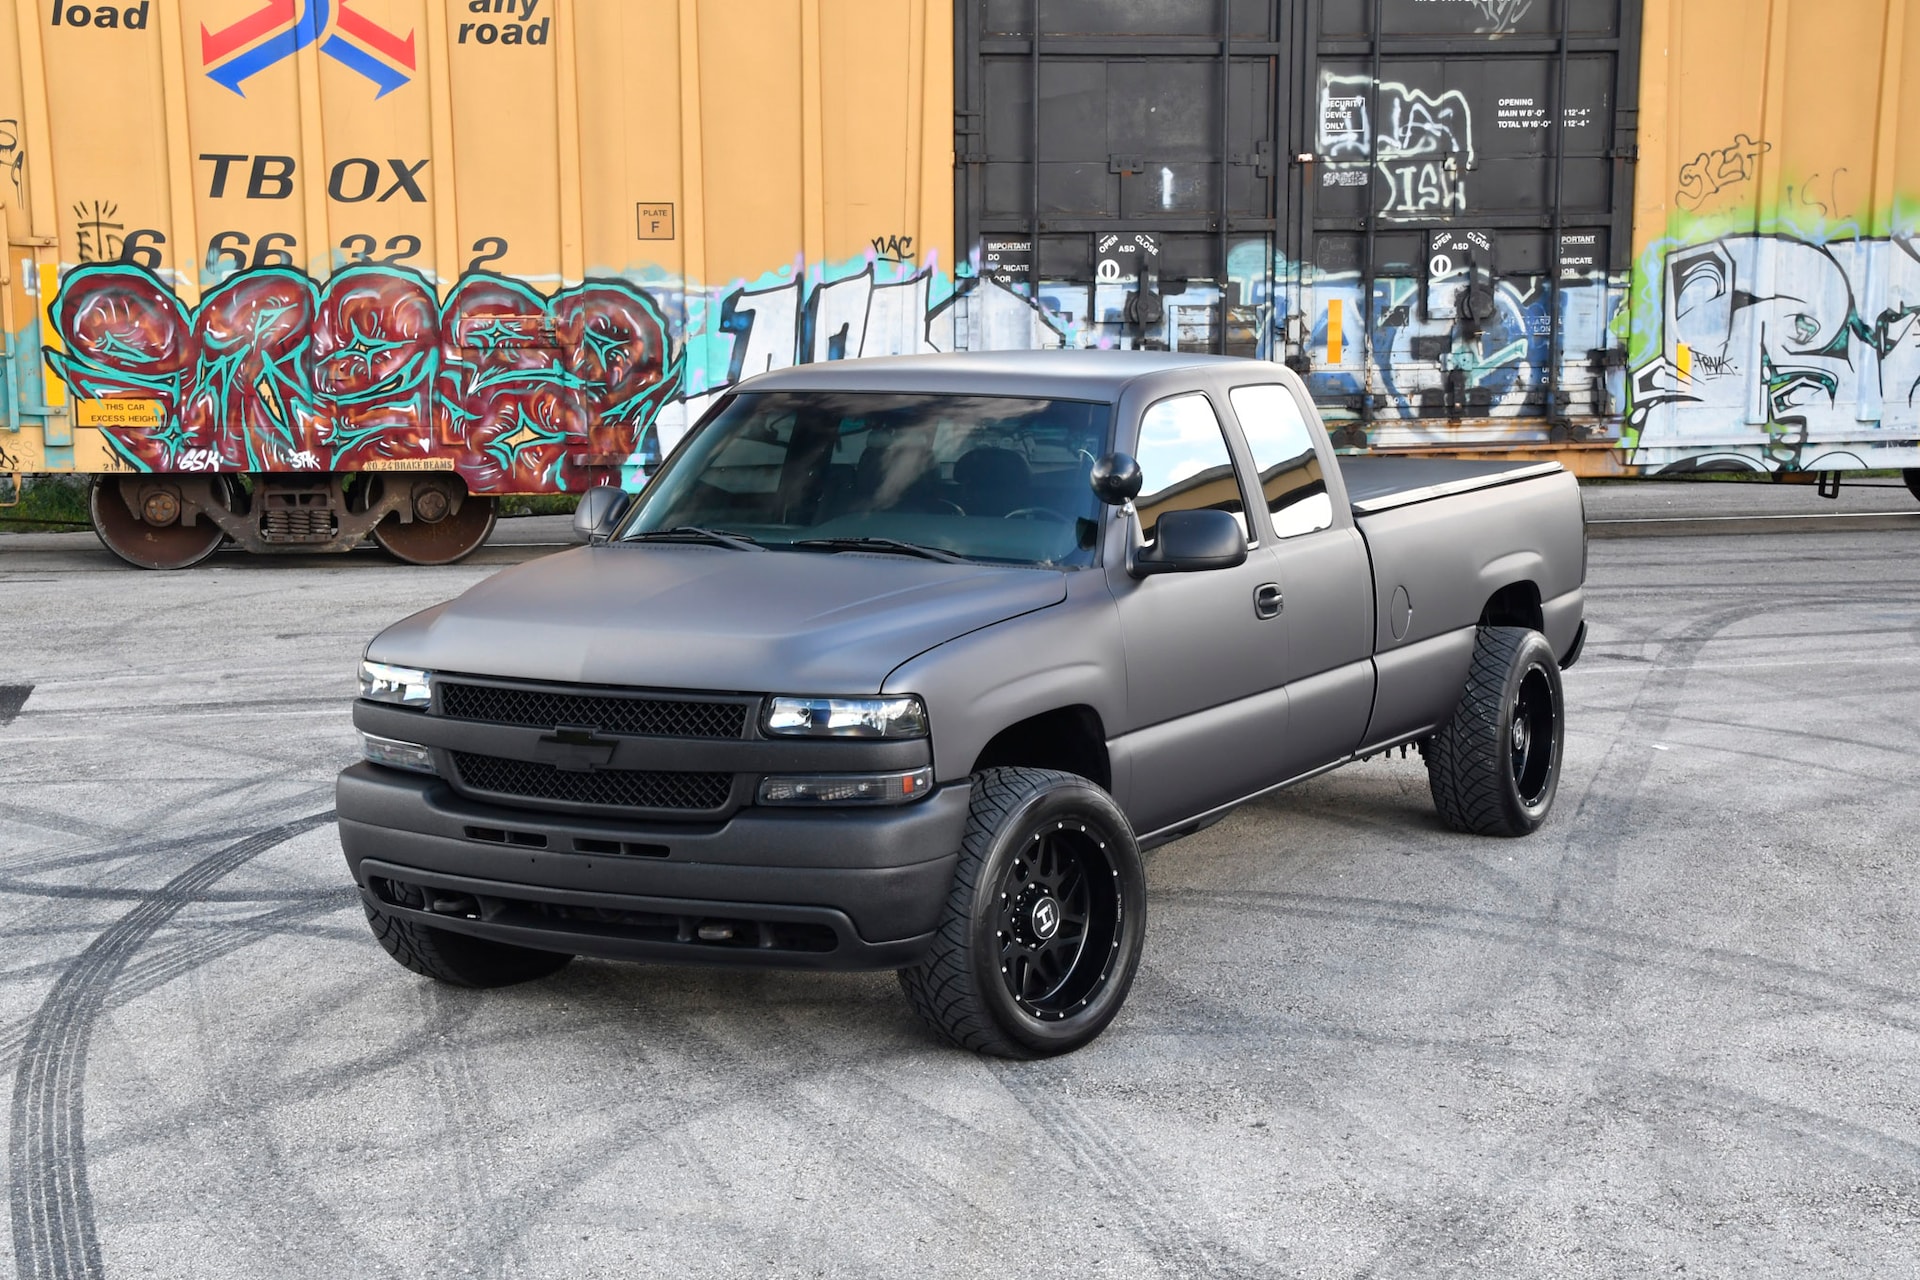 This 2002 Chevy Silverado was Built for Speed on the Street and Track